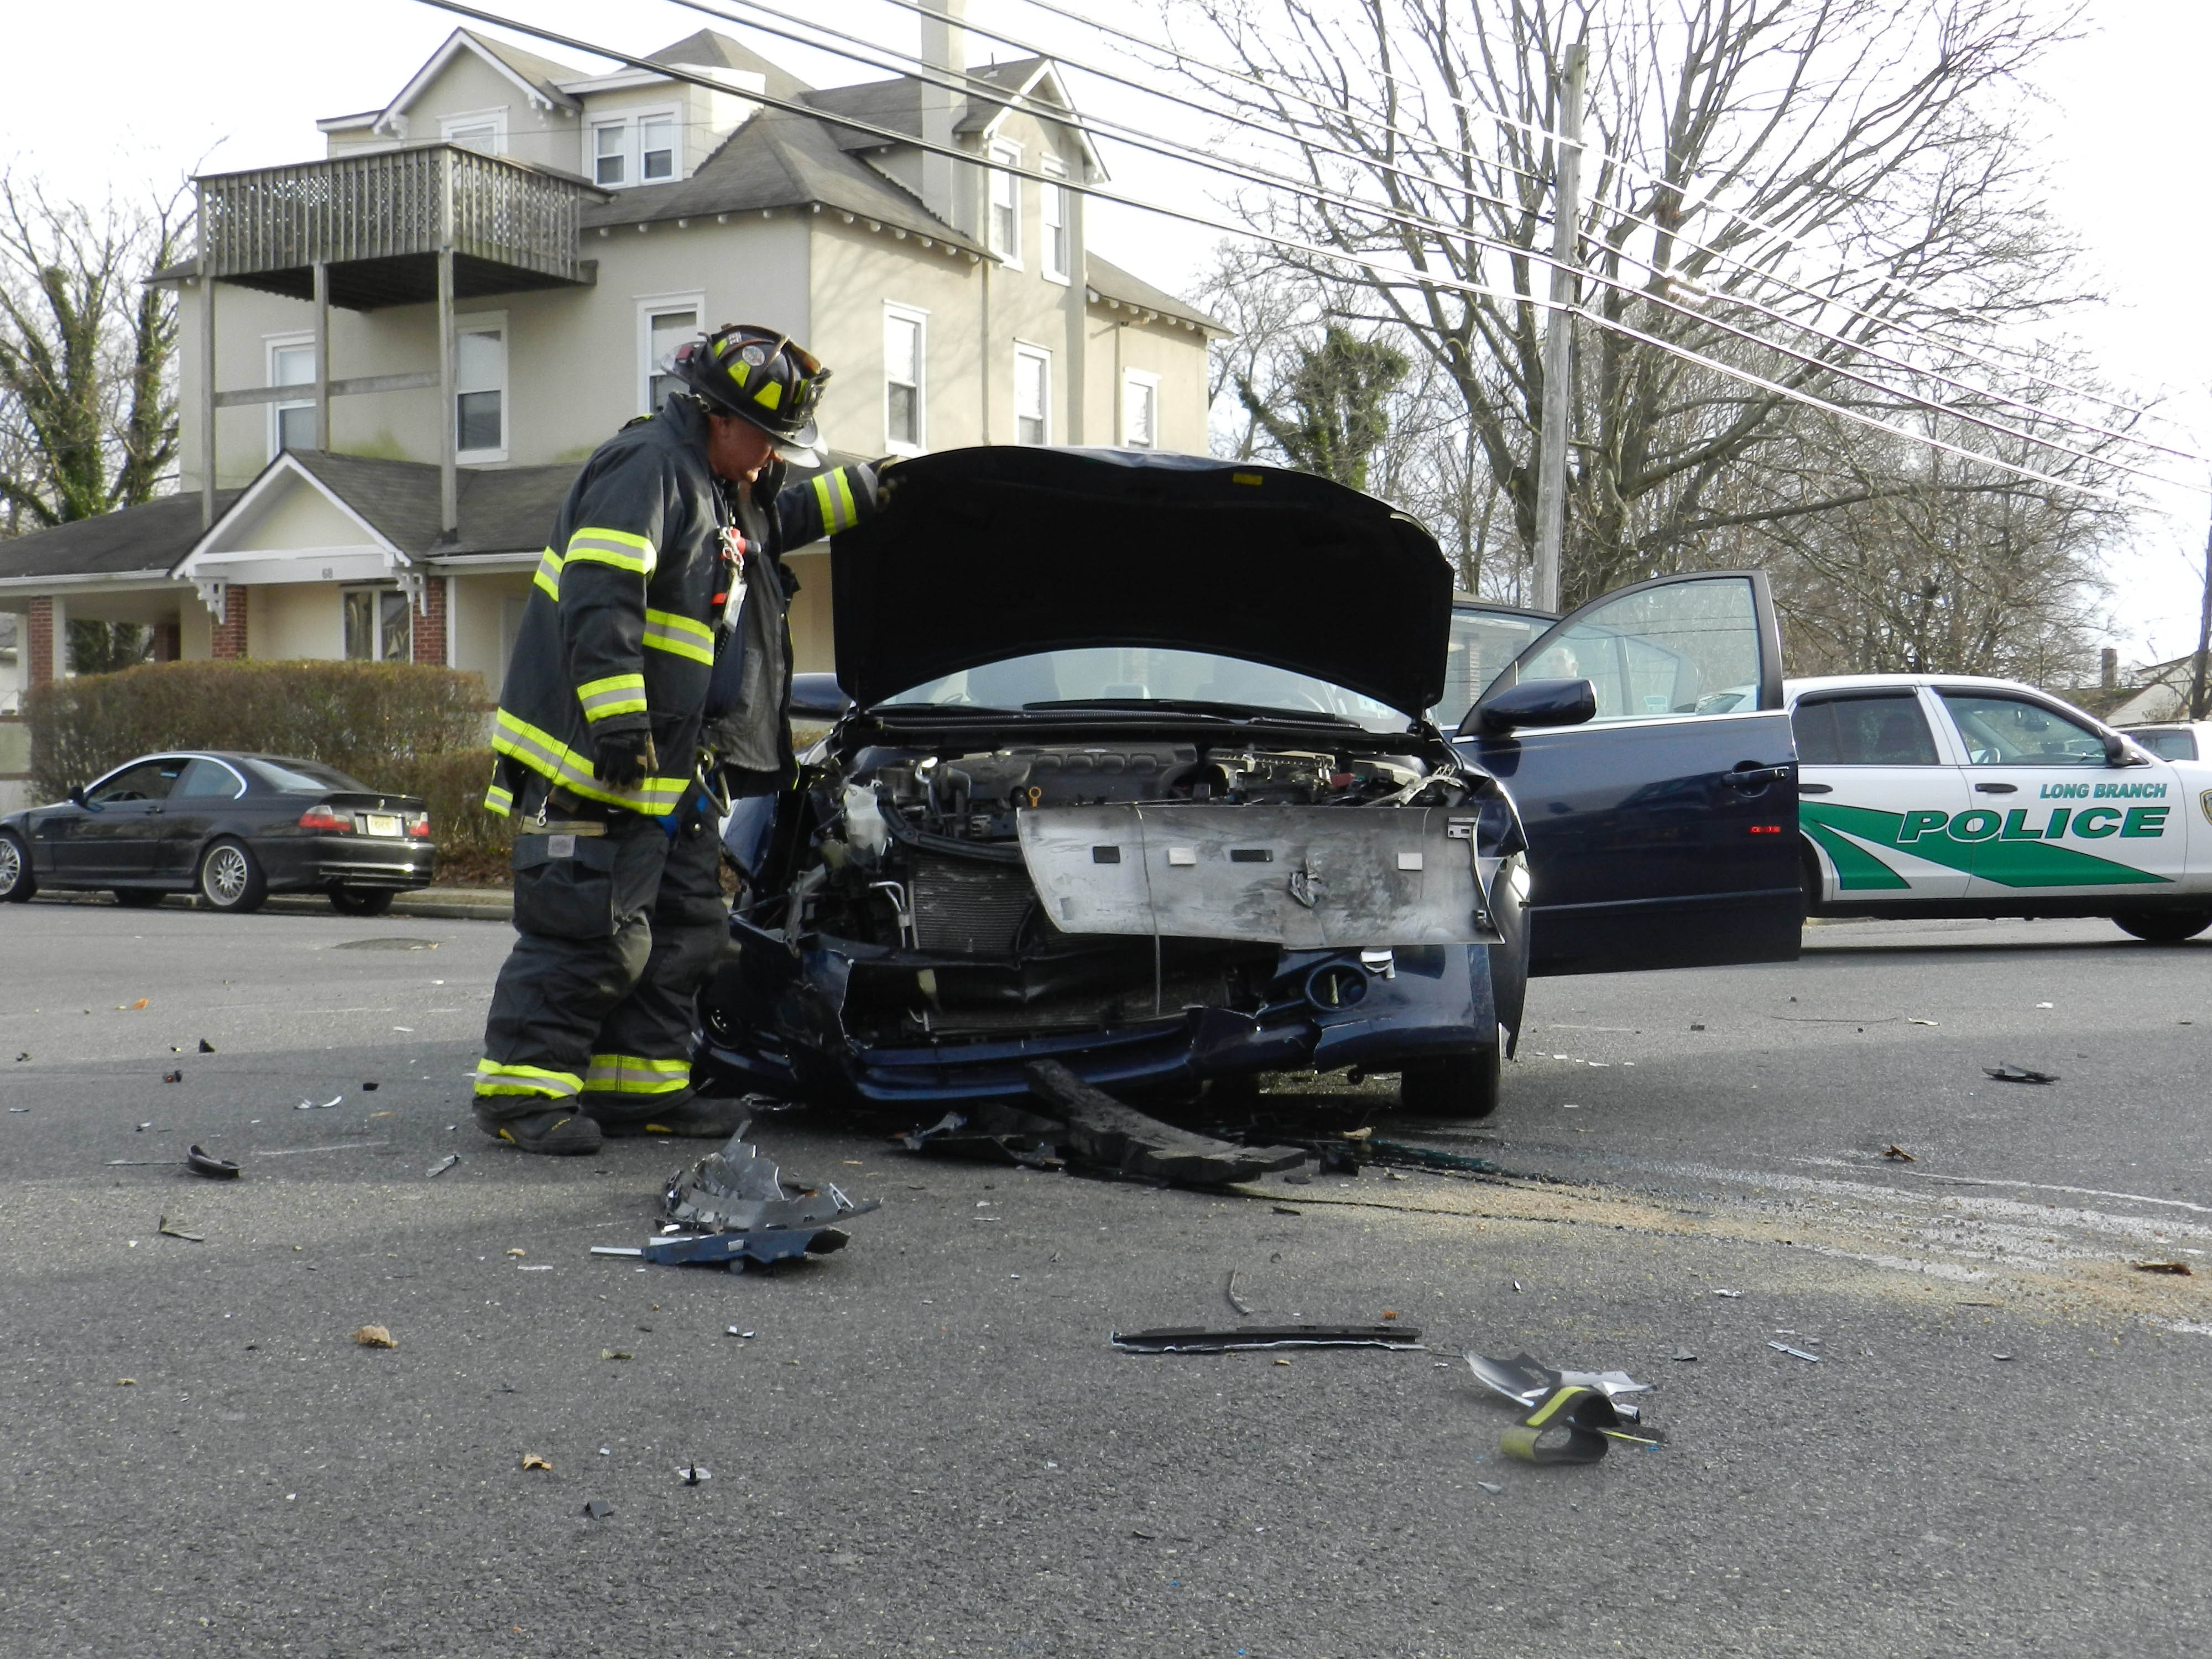 long branch accident image